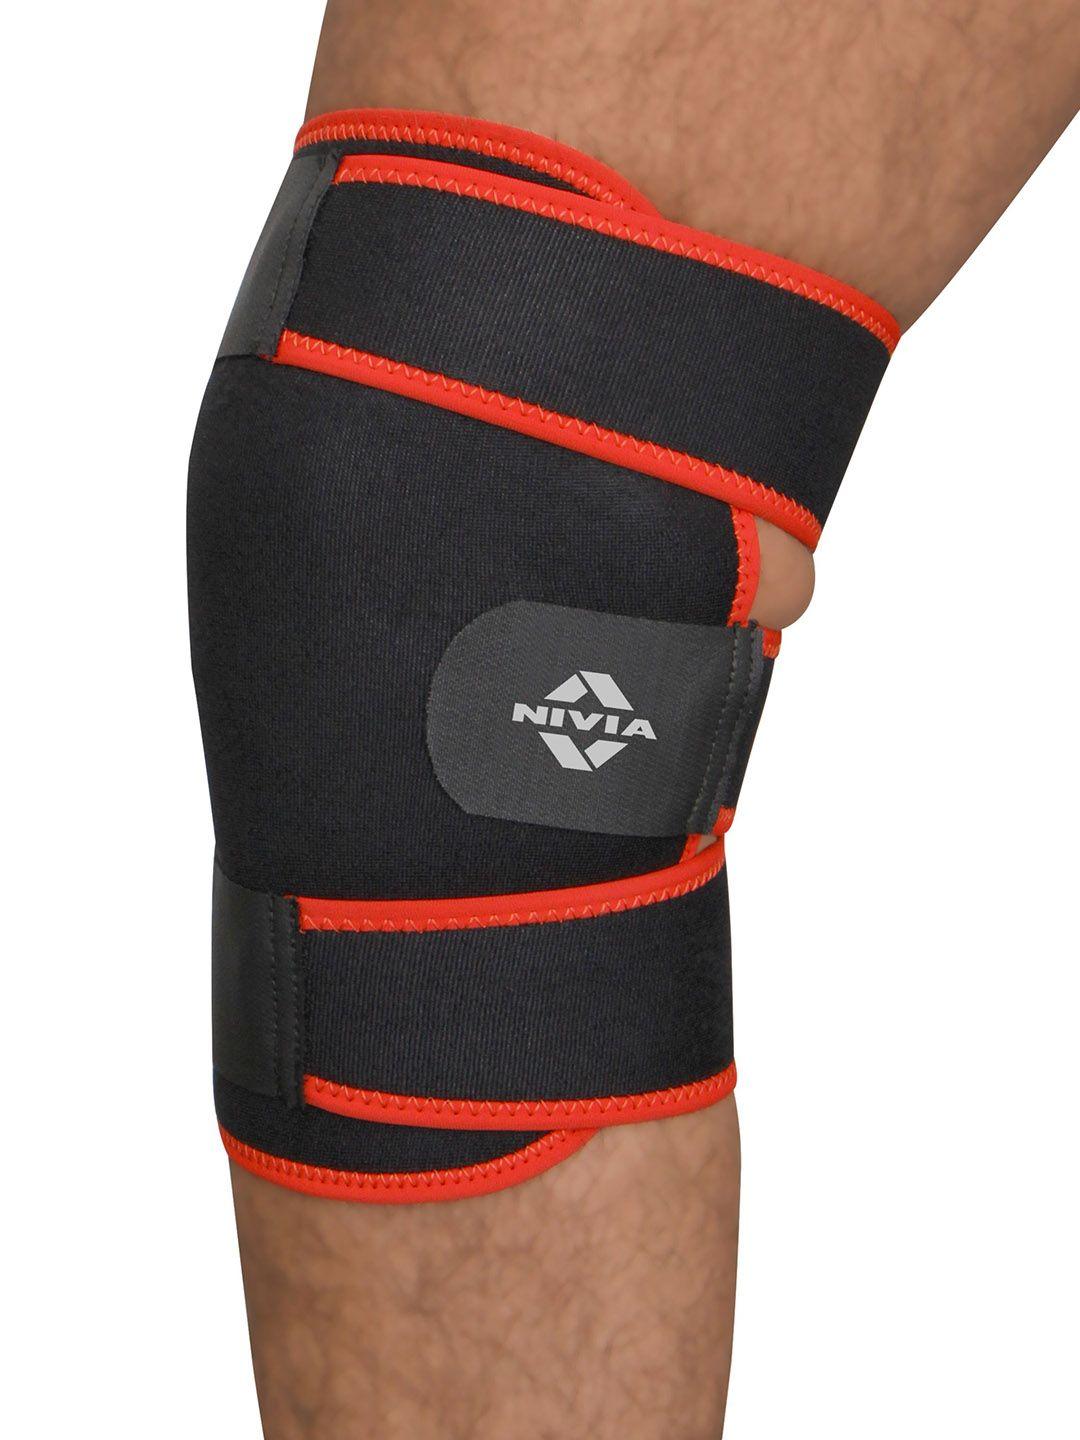 nivia adjustable knee support straps sports accessories